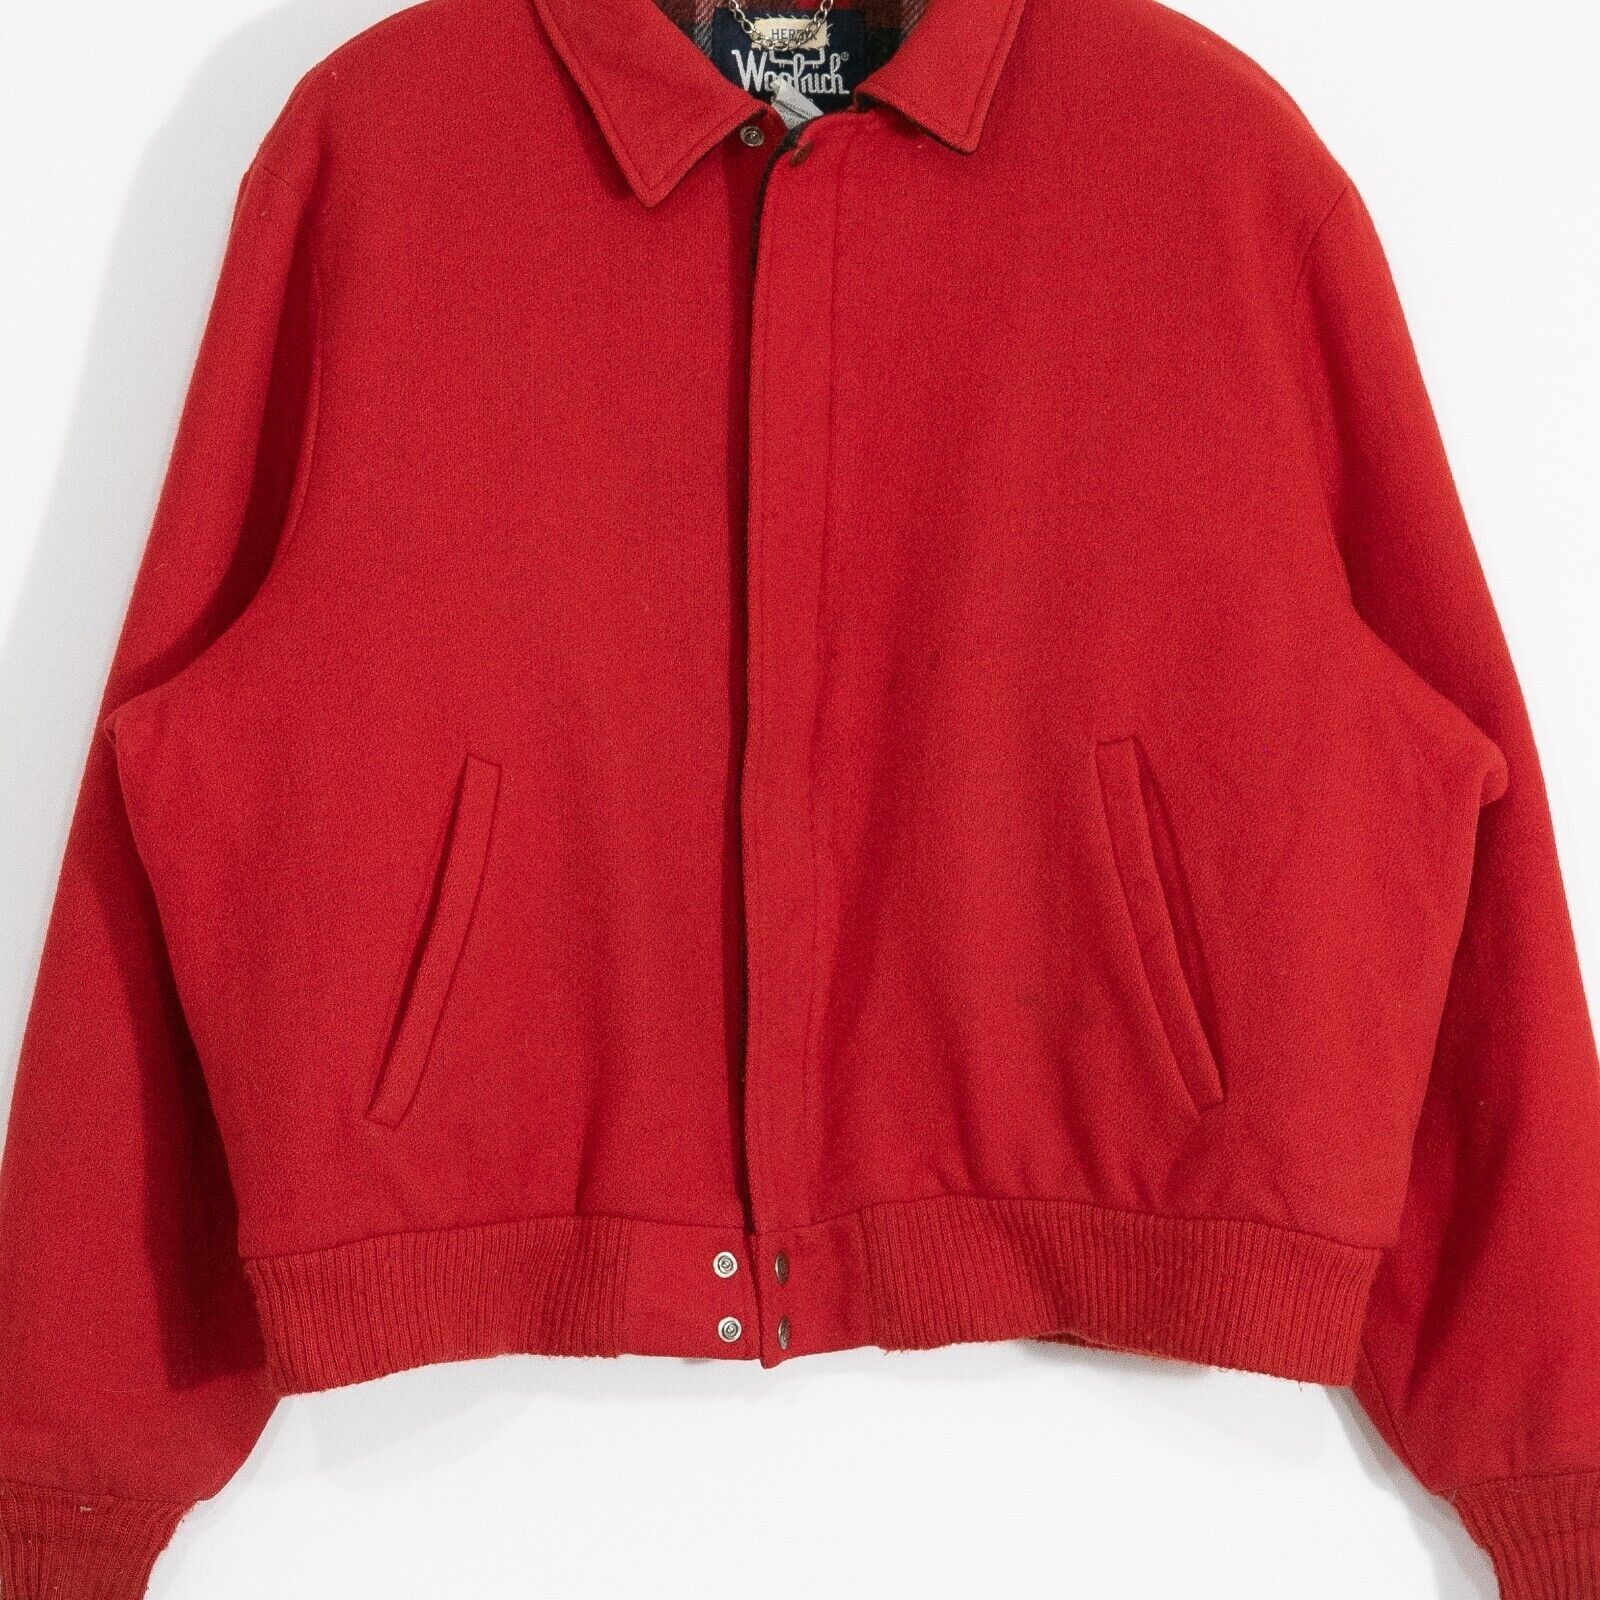 Vintage Vintage 80s Woolrich Bomber Jacket Mens XL Red Wool Flannel Size US XL / EU 56 / 4 - 2 Preview